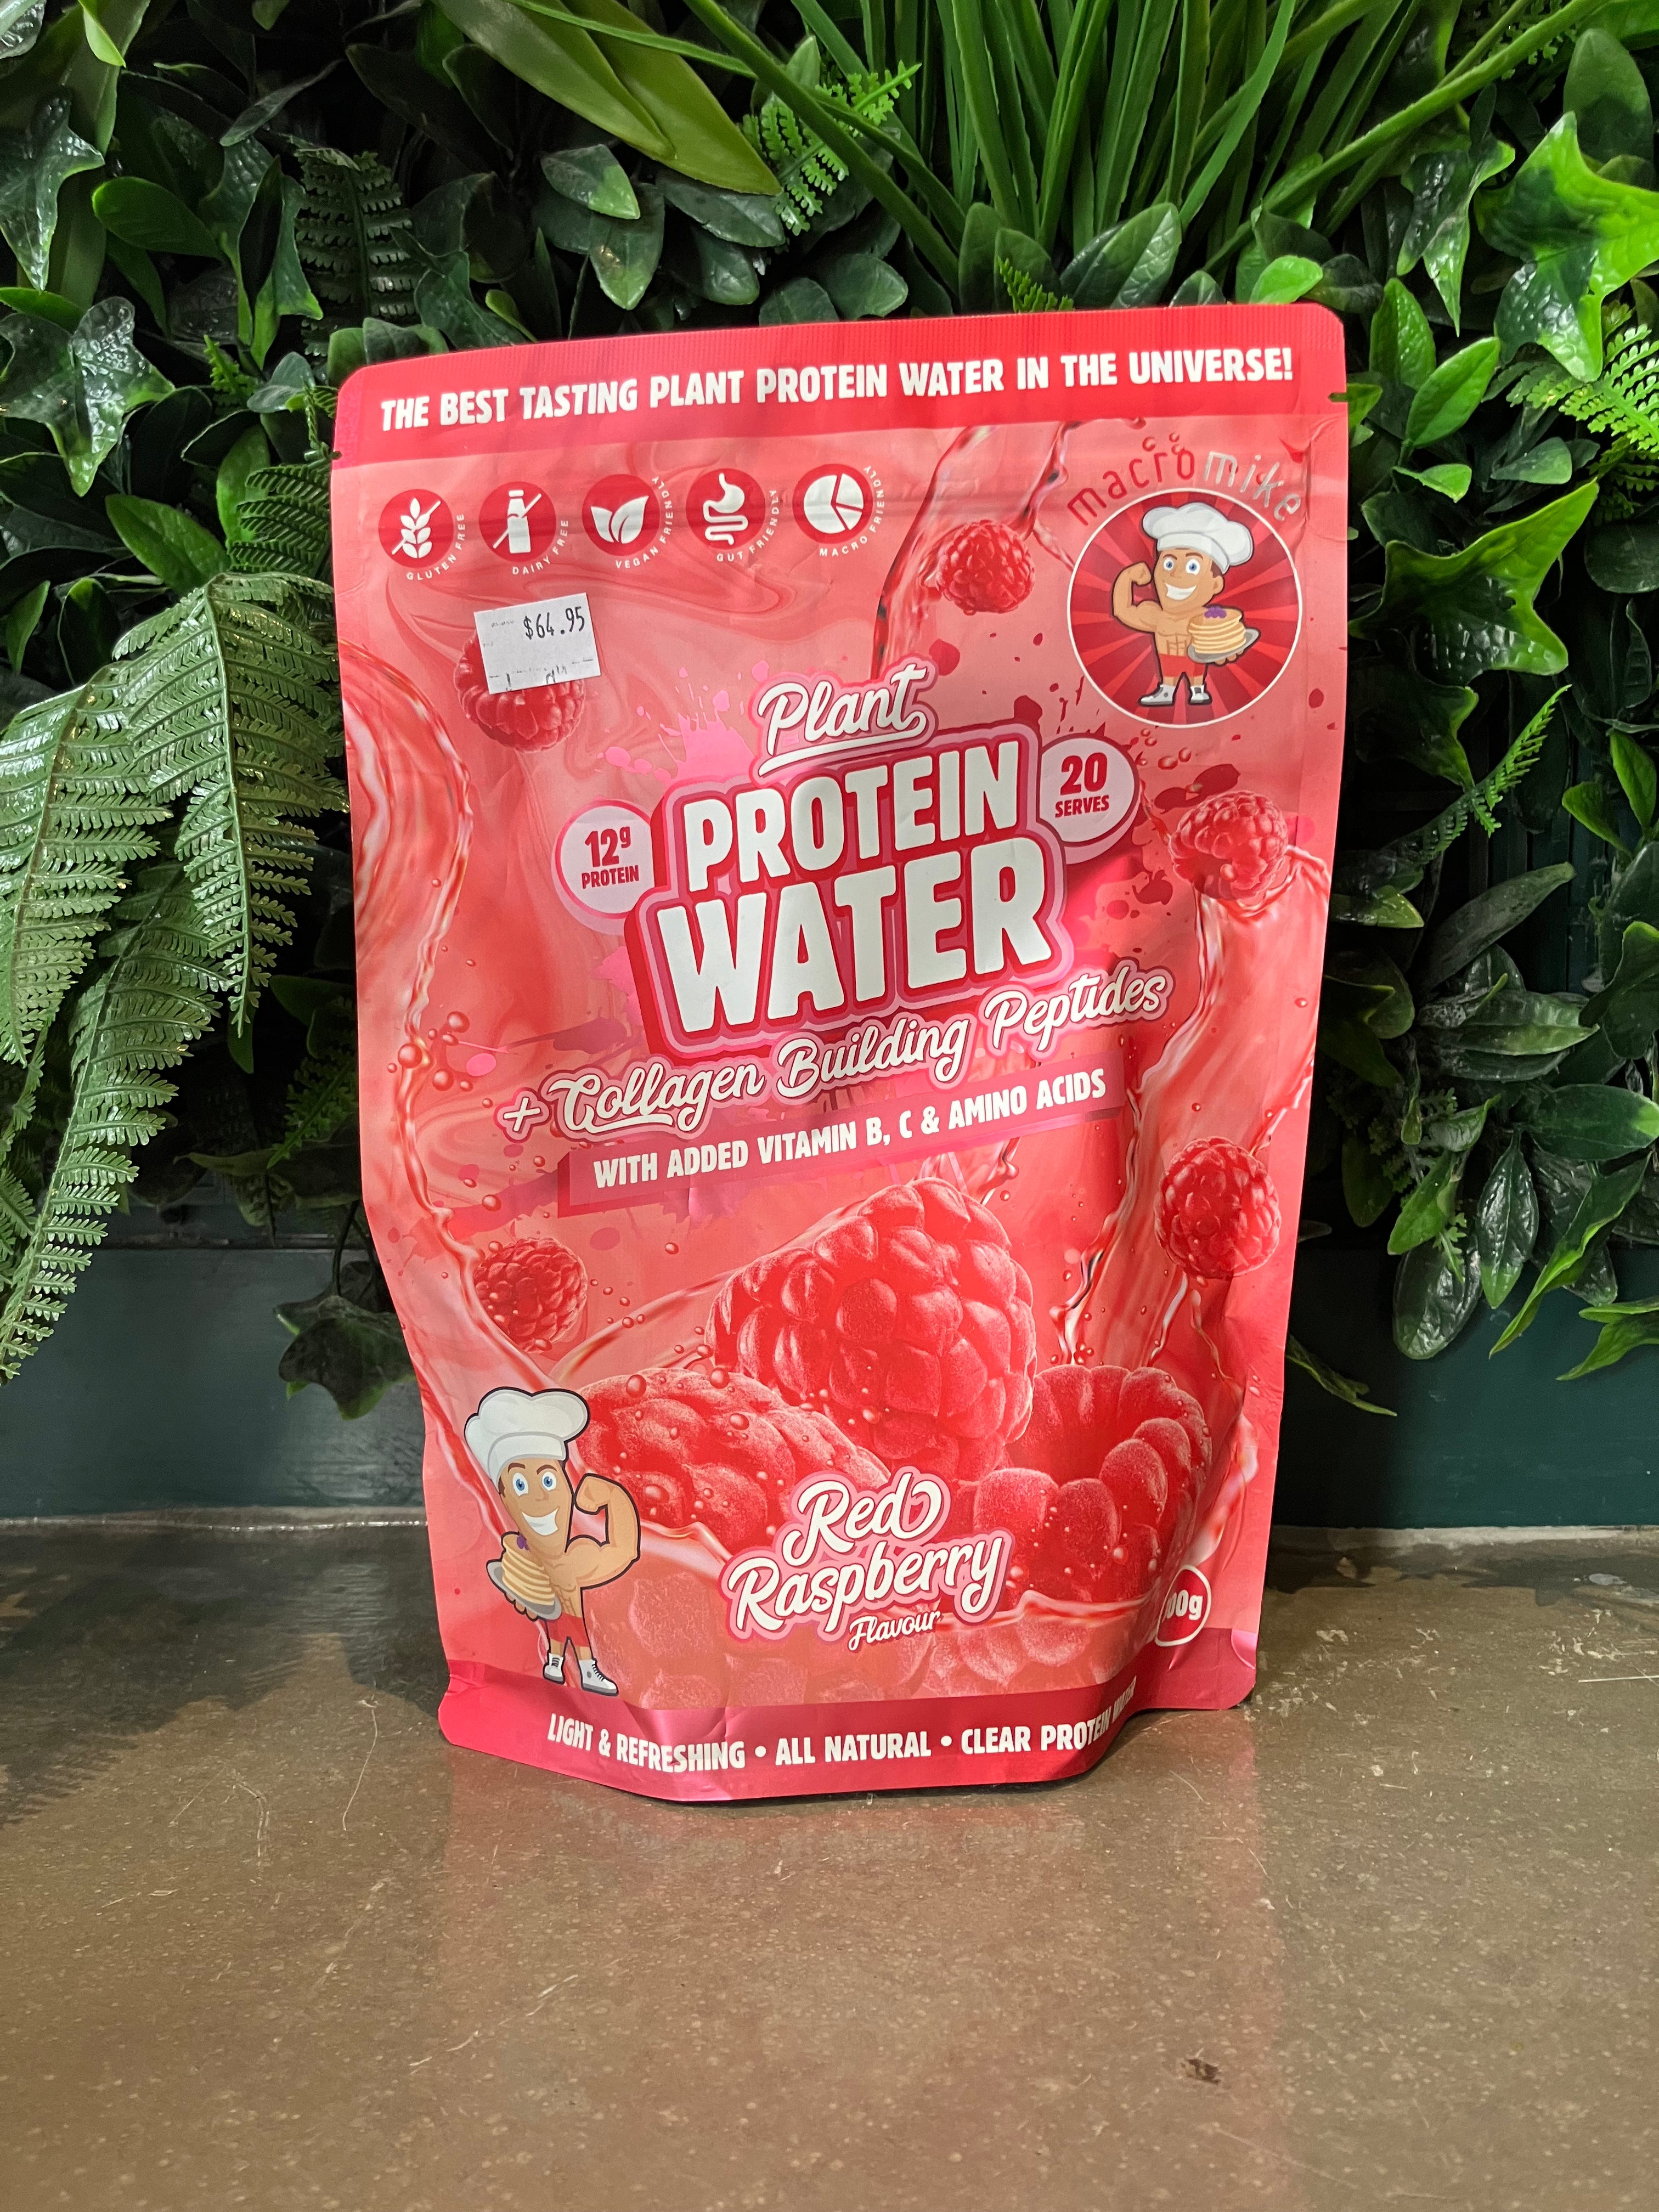 Macro Mike - Plant protein water - Red Raspberry flavour - 20 serves